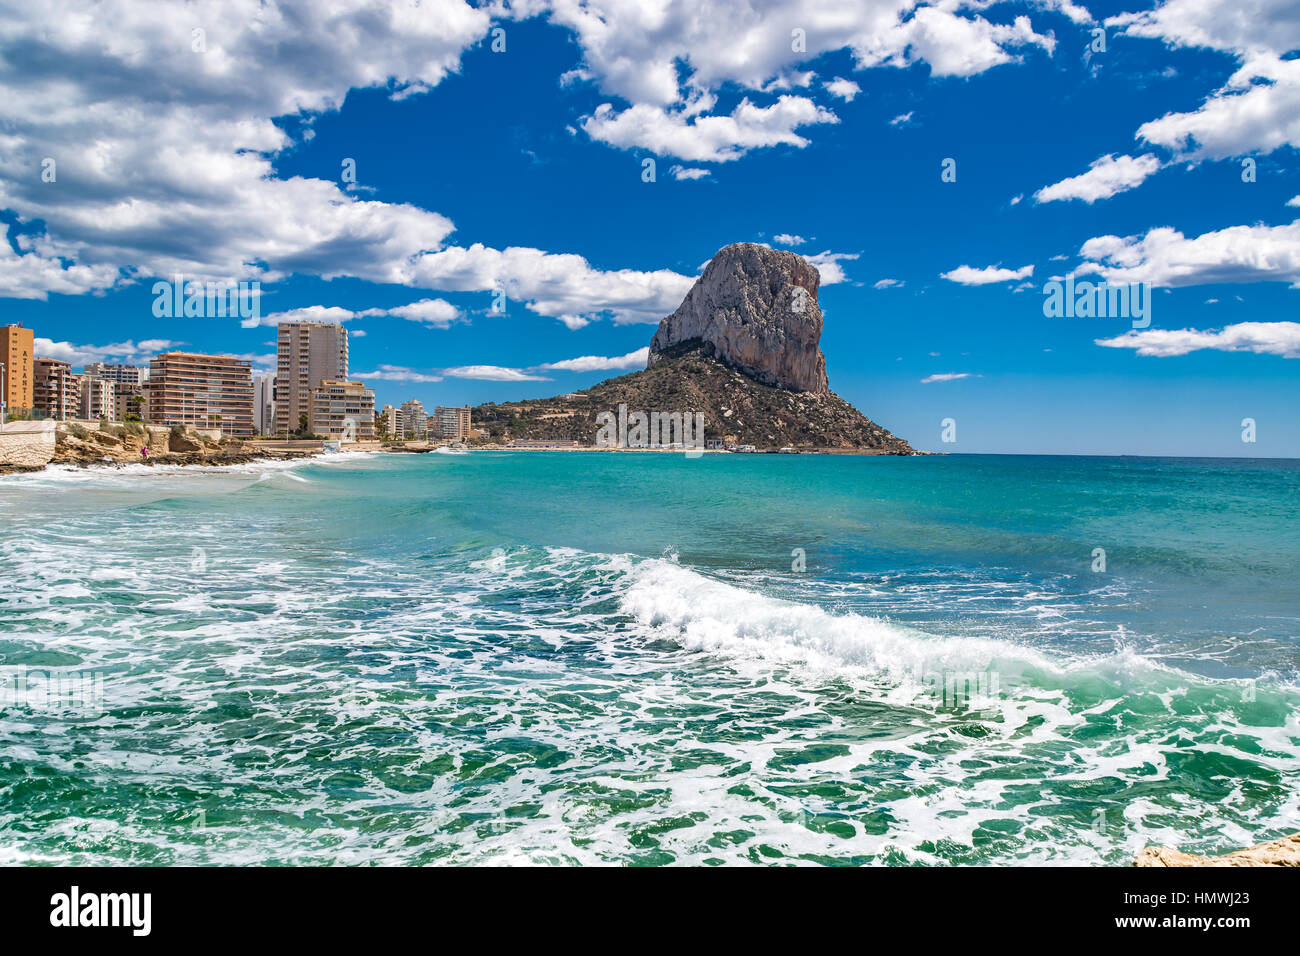 Calpe is a coastal town located in the comarca of Marina Alta, in the province of Alicante, Valencian Community, Spain, by the Mediterranean Sea. Stock Photo